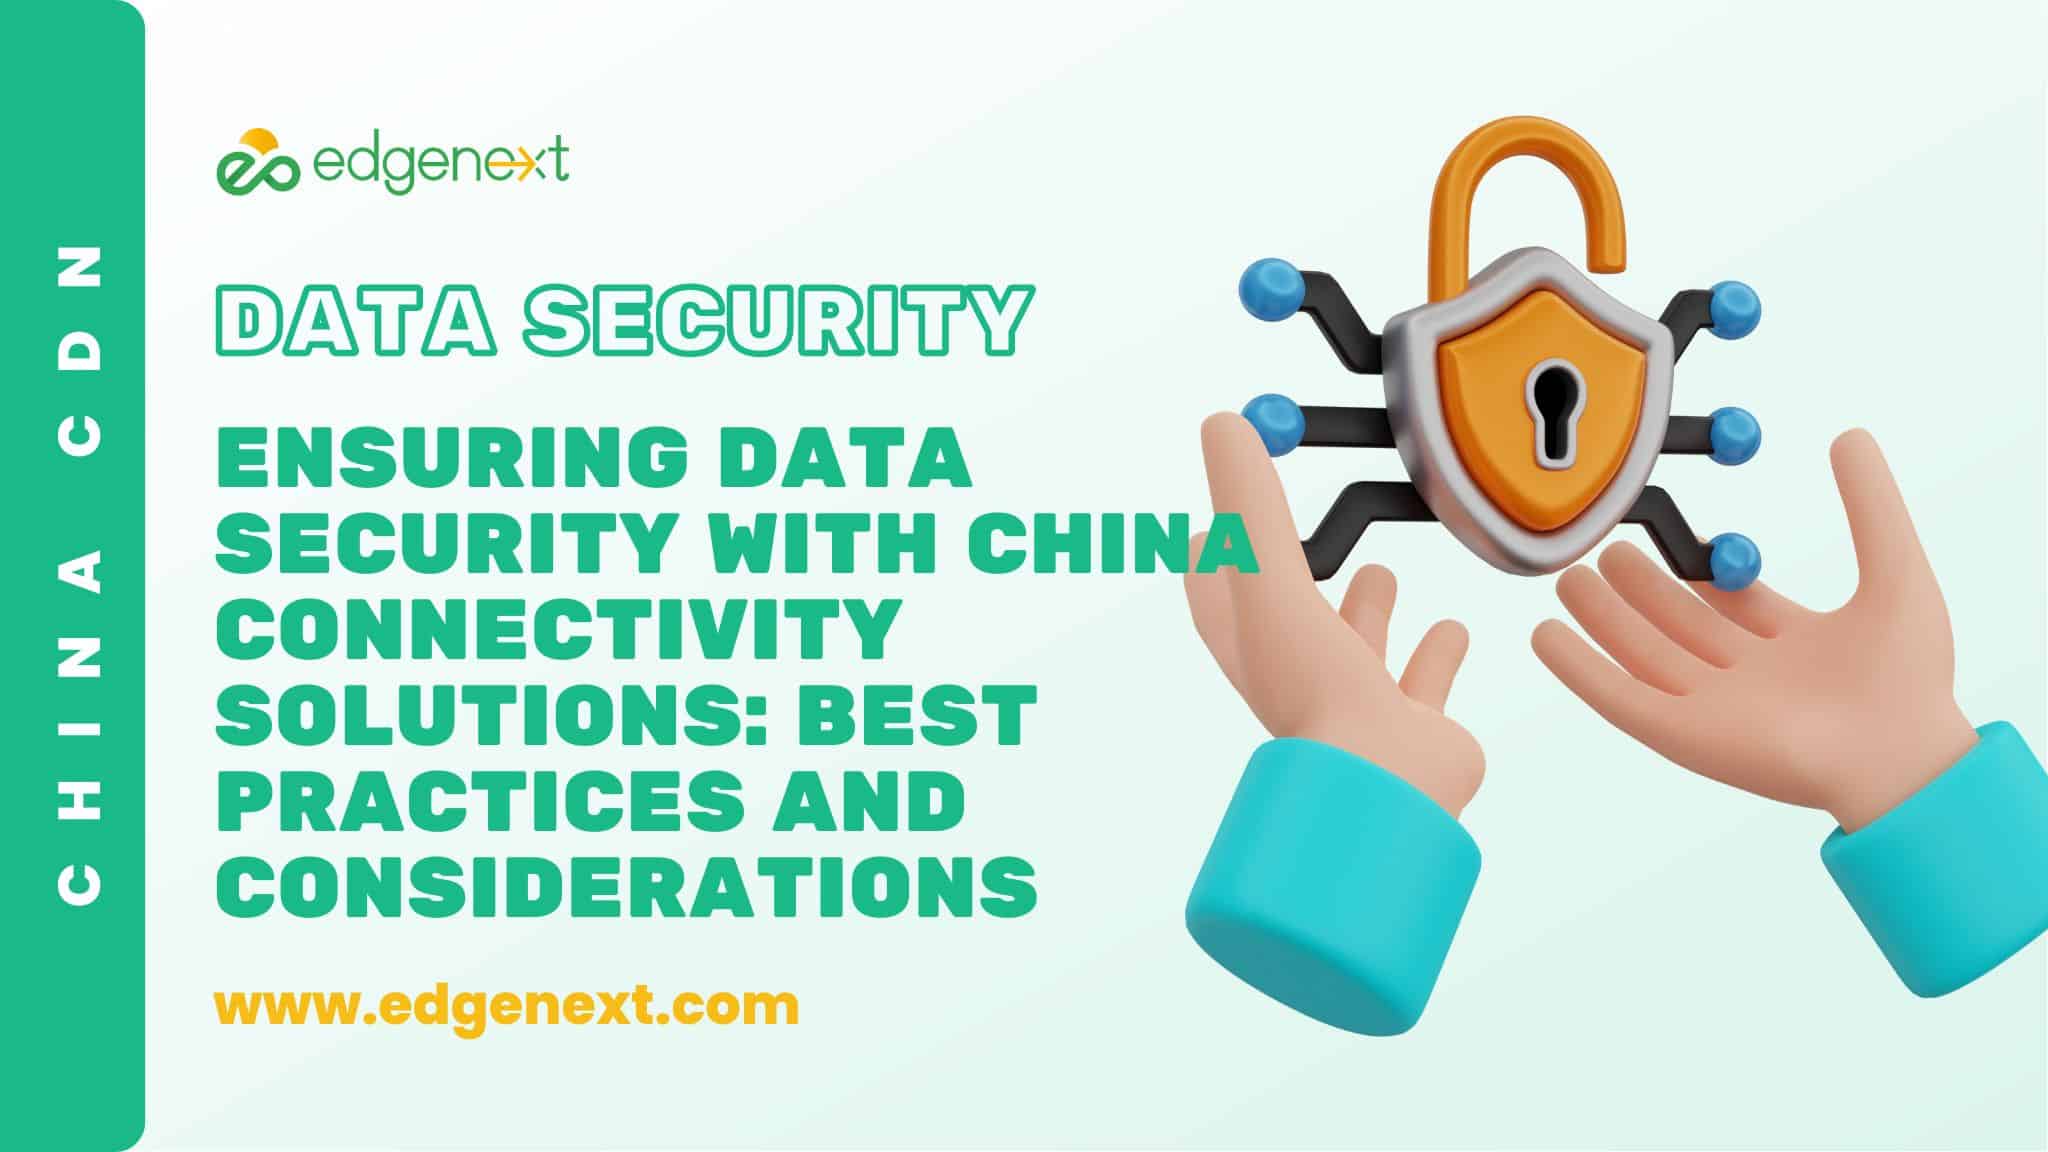 Ensuring Data Security with China Connectivity Solutions: Best Practices and Considerations